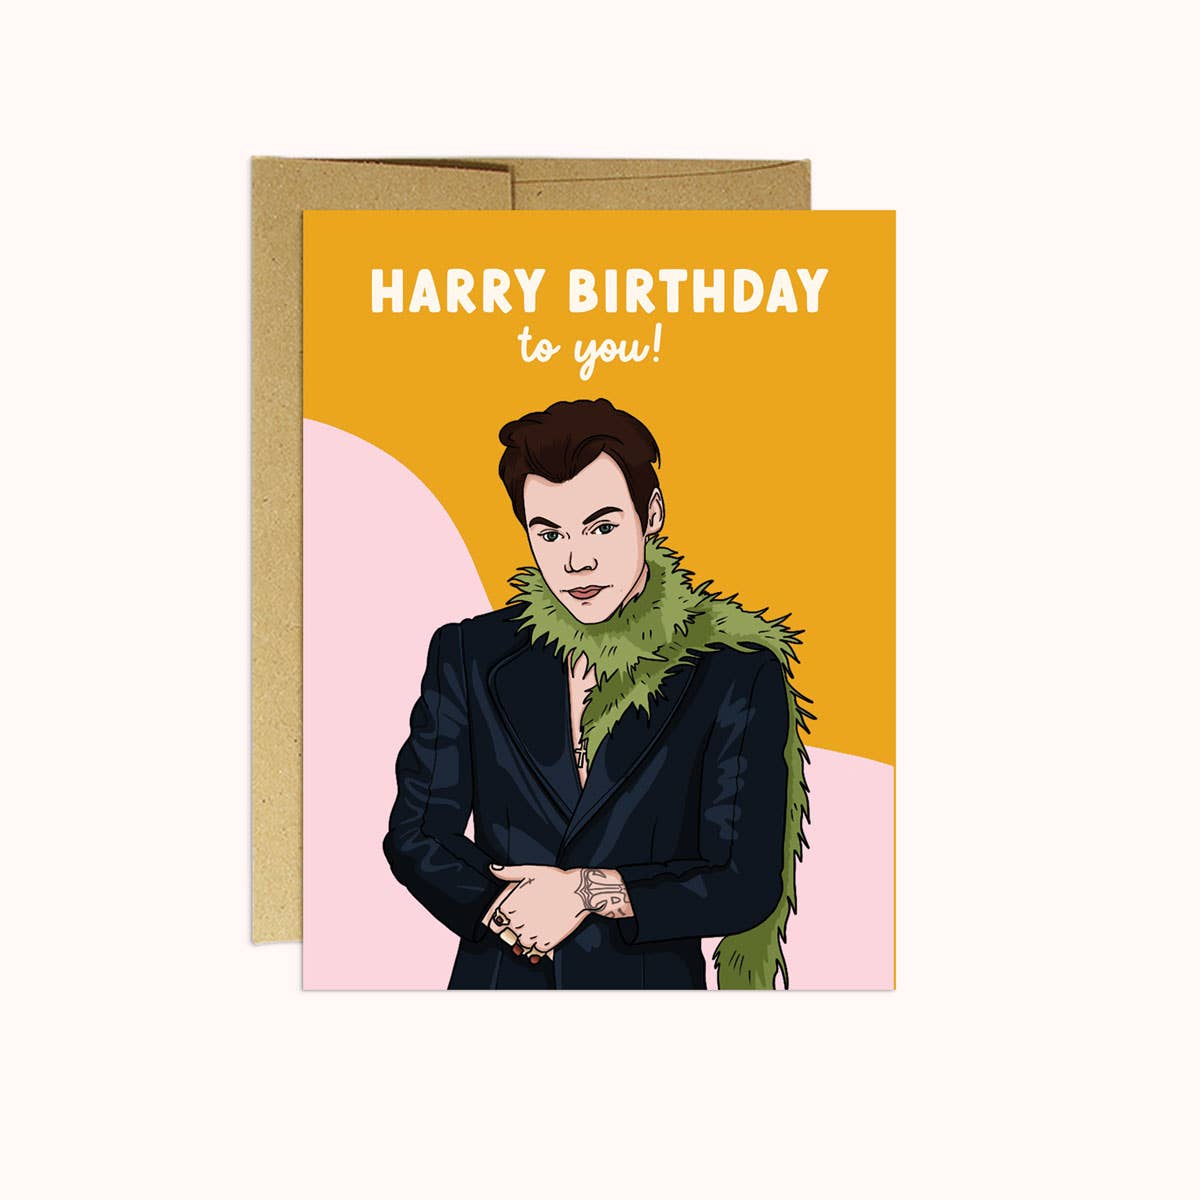 Harry Birthday to You Card